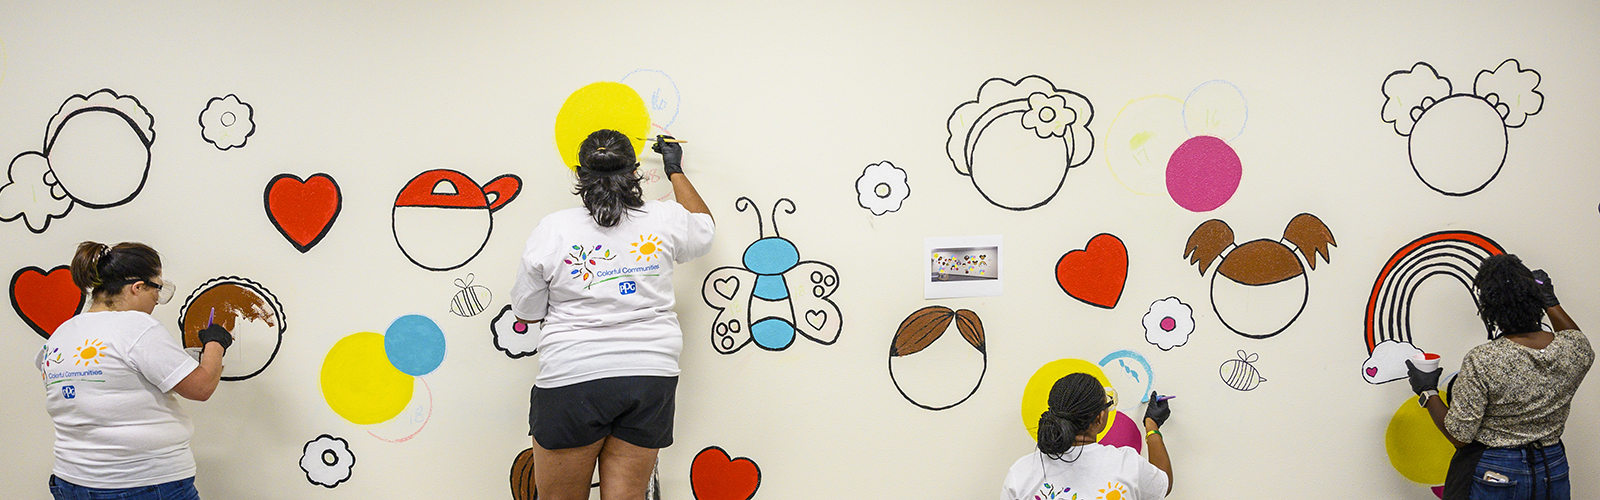 From left to right, Kim Blair, senior director of development at the UW Foundation; Desiree Bates, co-lead on the UW Bridge to the Chemistry Doctorate Program, and UW computational chemist; Shannon Brown, UW graduate student and Bridge Fellow; and Candace Patterson, South Madison Partnership coordinator work on a mural on the wall of the Kids Classroom designed by Madison-based artist Lilada Gee at the UW South Madison Partnership on South Park Street in Madison, Wisconsin on Aug. 18, 2022. The mural painting project was developed in collaboration with UW South Madison Partnership staff, the paint company PPG’s Colorful Communities program, and campus partners. The murals reflect Gee’s bold and colorful style and are designed to inspire the community and families that use the location for programming. (Photo by Althea Dotzour / UW–Madison)